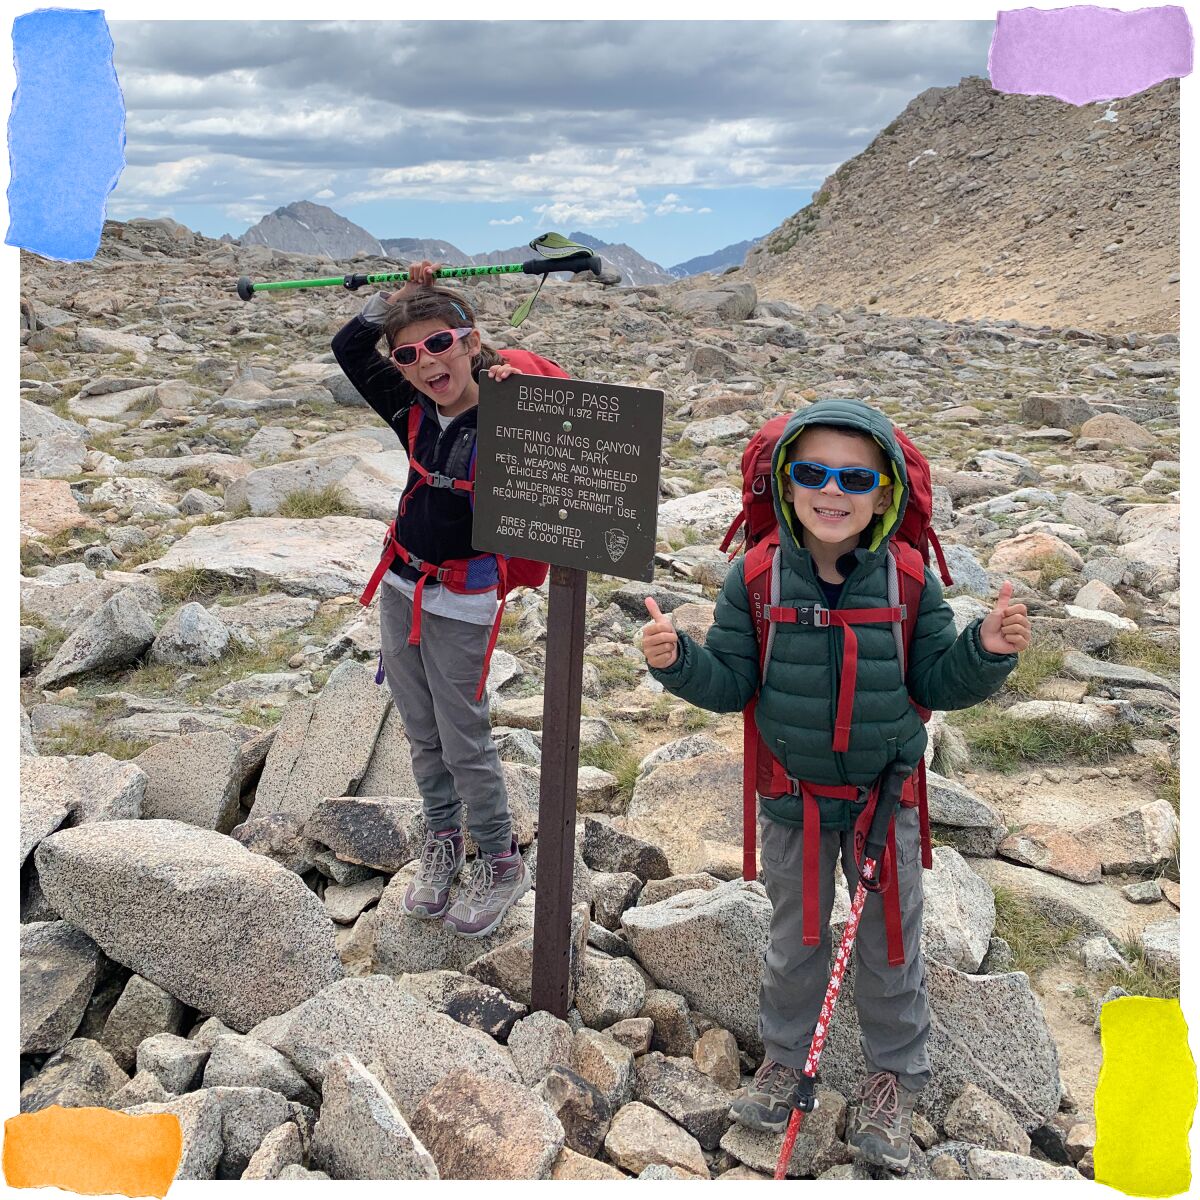 The twins pose for a picture at Bishop Pass.